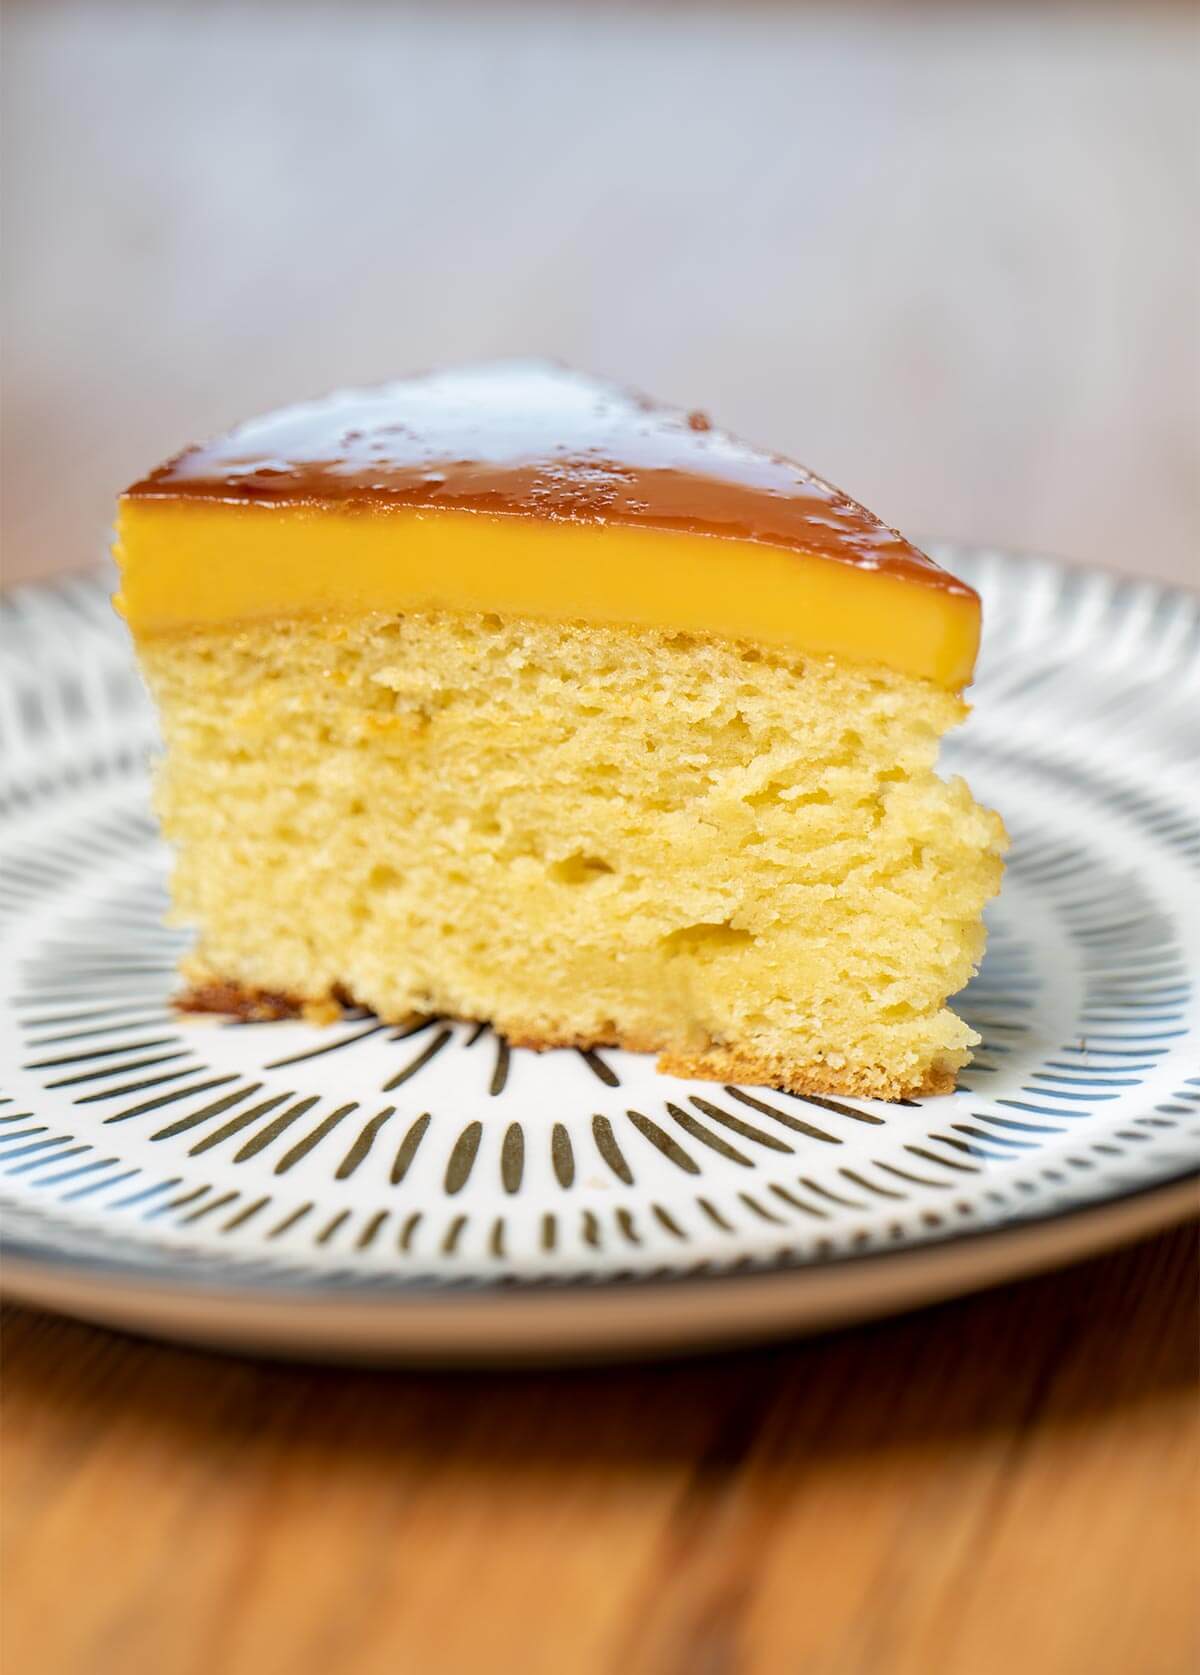 Custard Cake Recipe - The Cooking Collective